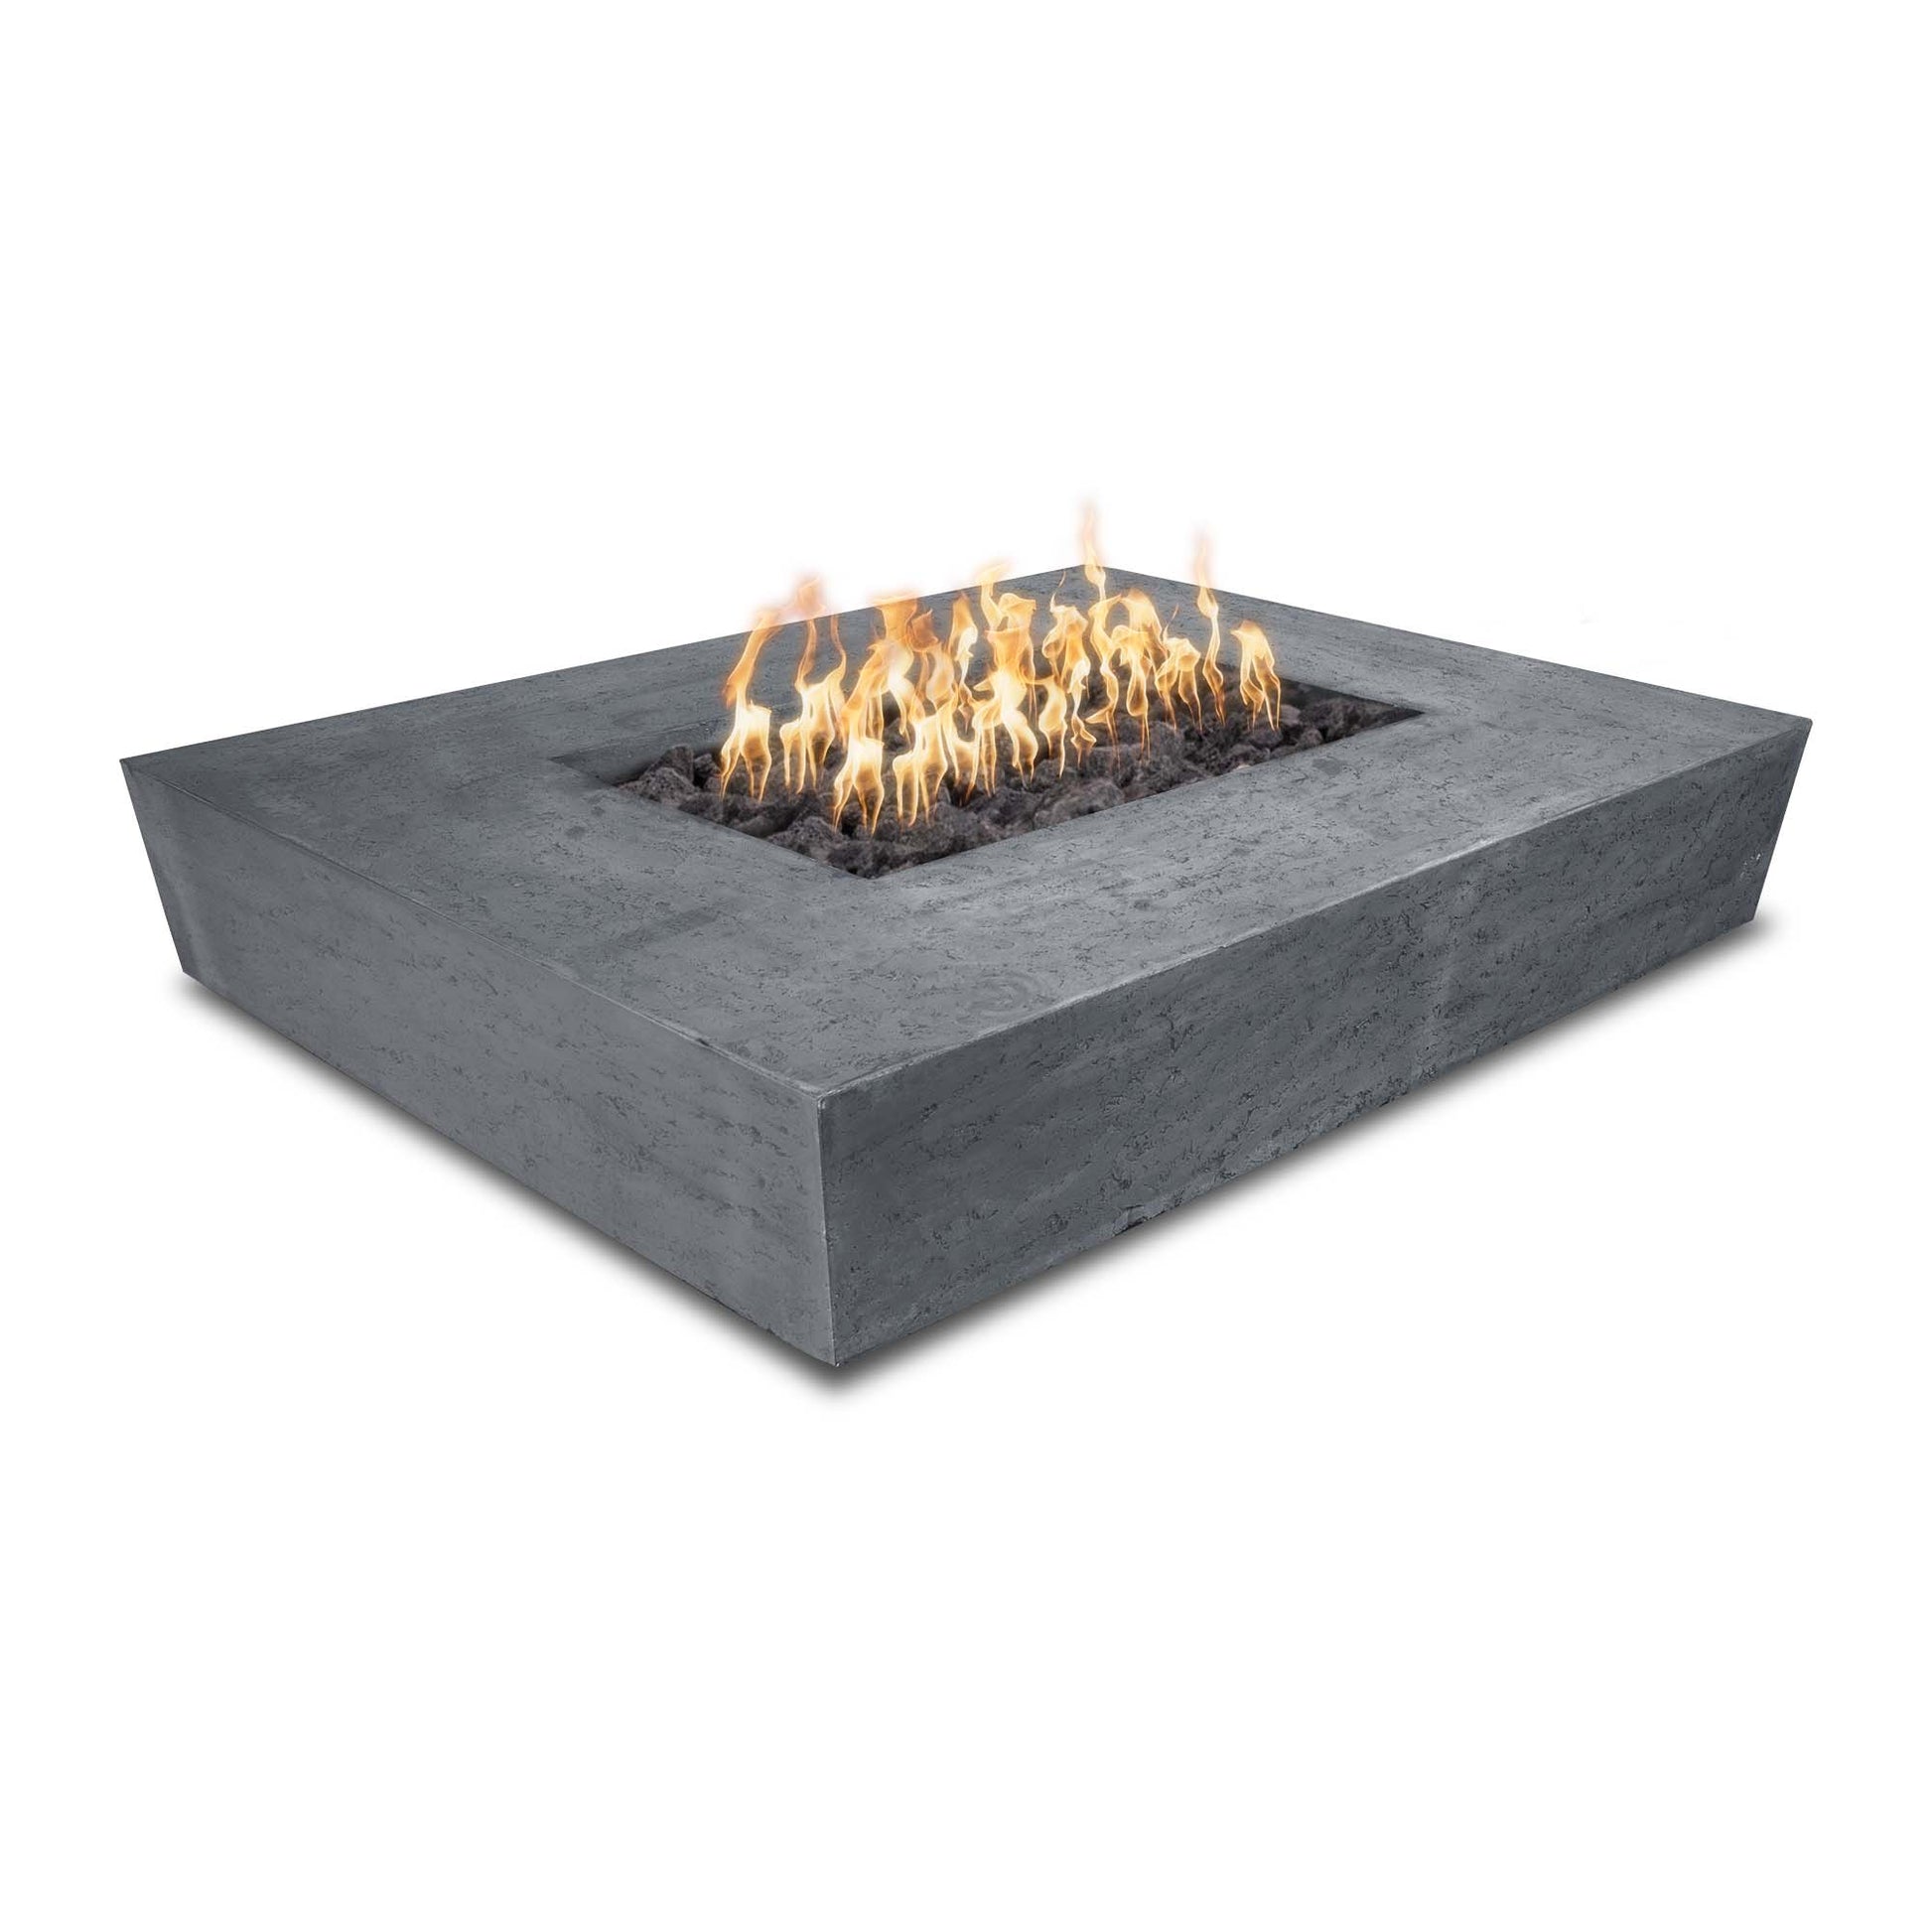 The Outdoor Plus Rectangular Heiko 58" Brown GFRC Concrete Liquid Propane Fire Pit with Match Lit Ignition